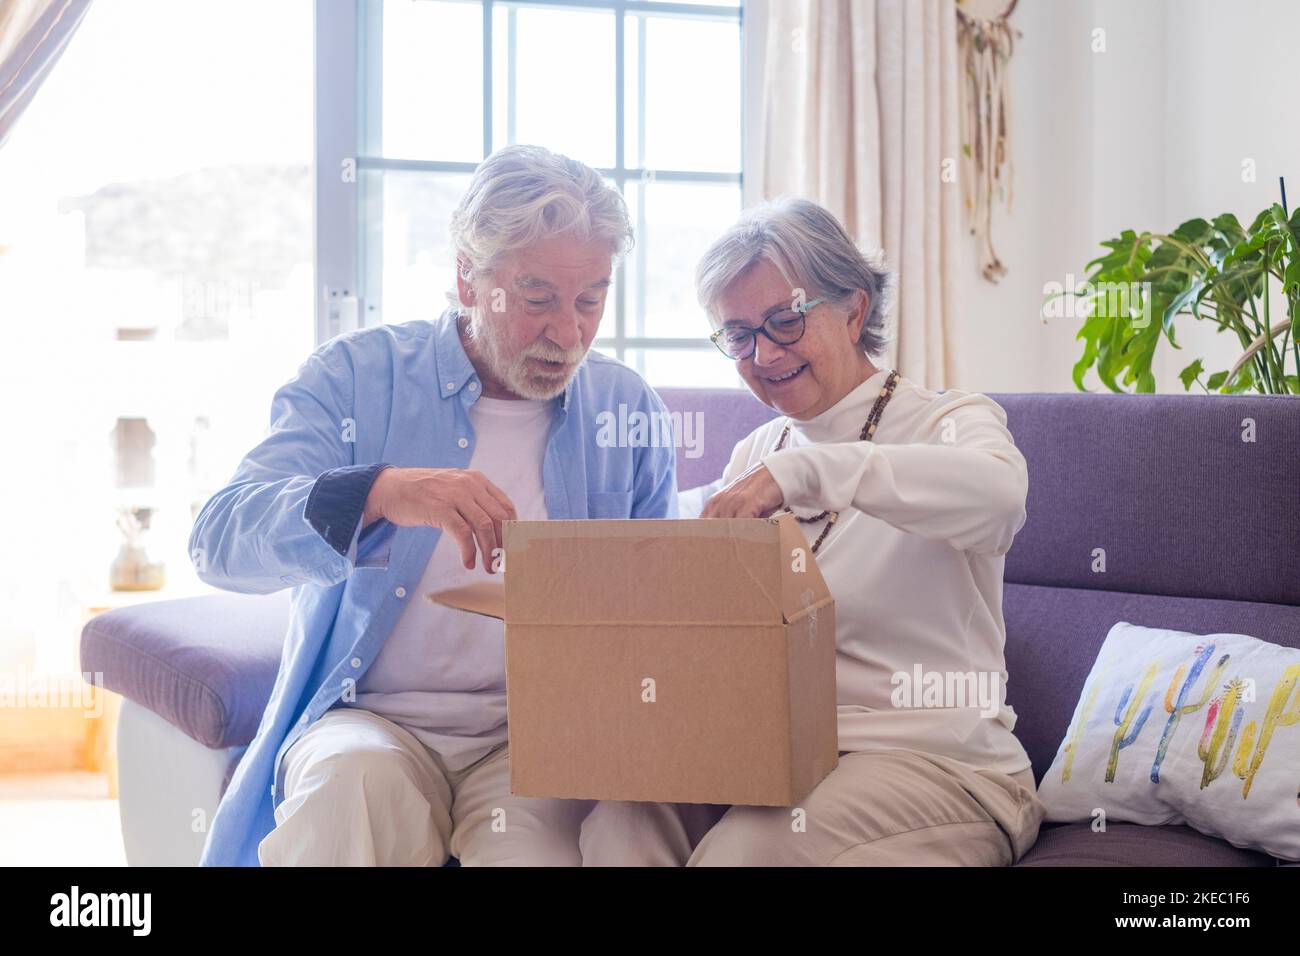 Happy mature aged older family couple unpacking carton box, satisfied with internet store purchase or unexpected gift, feeling excited of fast delivery shipping service, positive shopping experience. Stock Photo